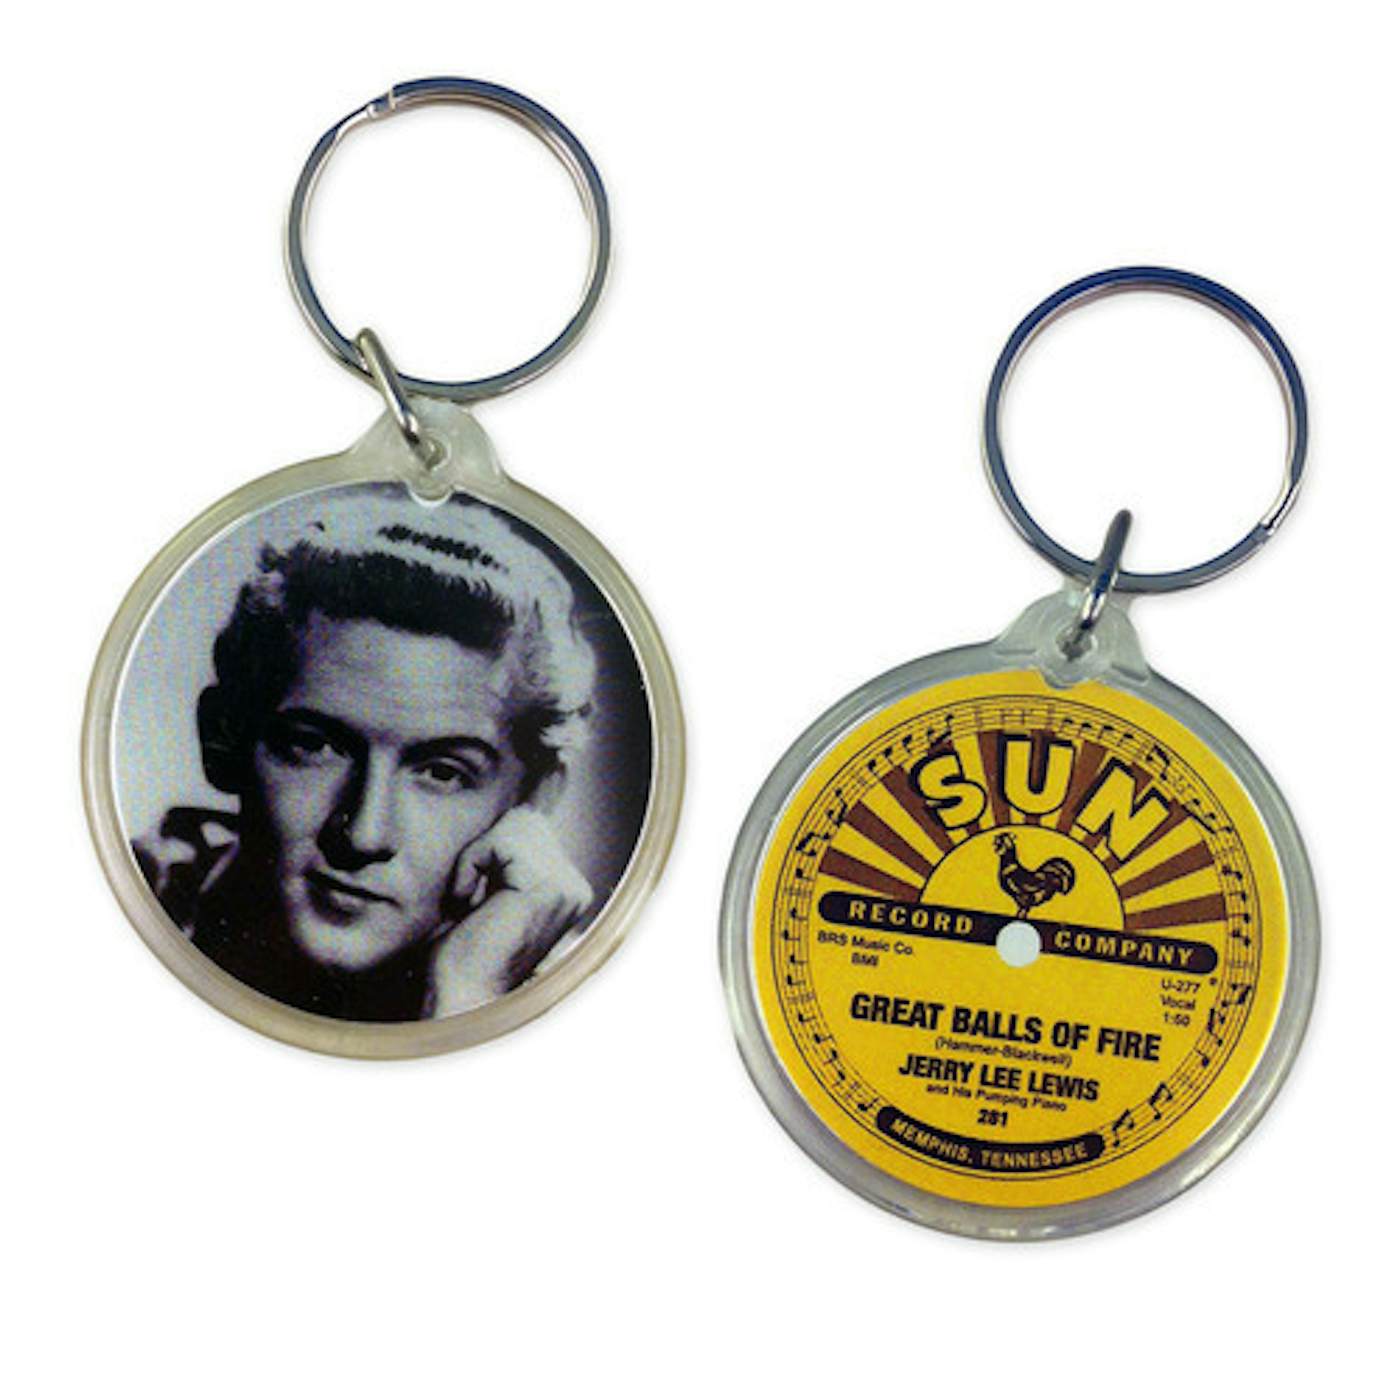 Jerry Lee Lewis Great Balls of Fire Photo Key Ring